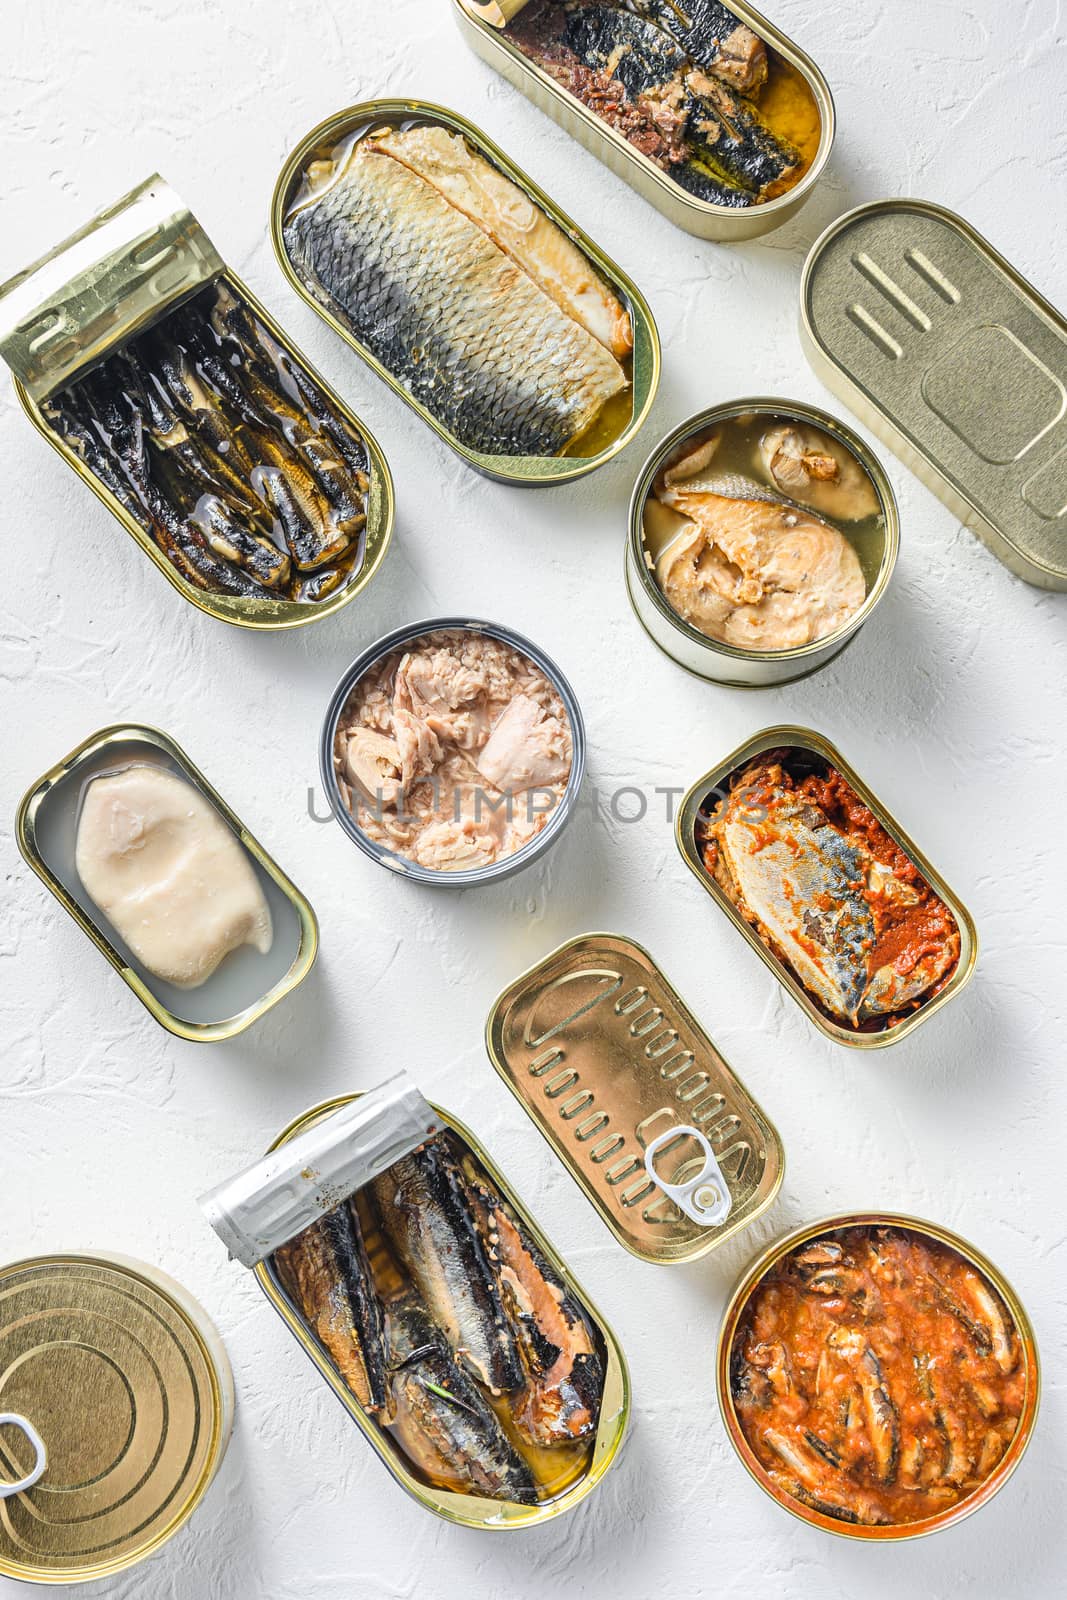 Tin can of fish and seafood, opened and closed cans with Saury, mackerel, sprats, sardines, pilchard, squid, tuna, over white background surface top view by Ilianesolenyi